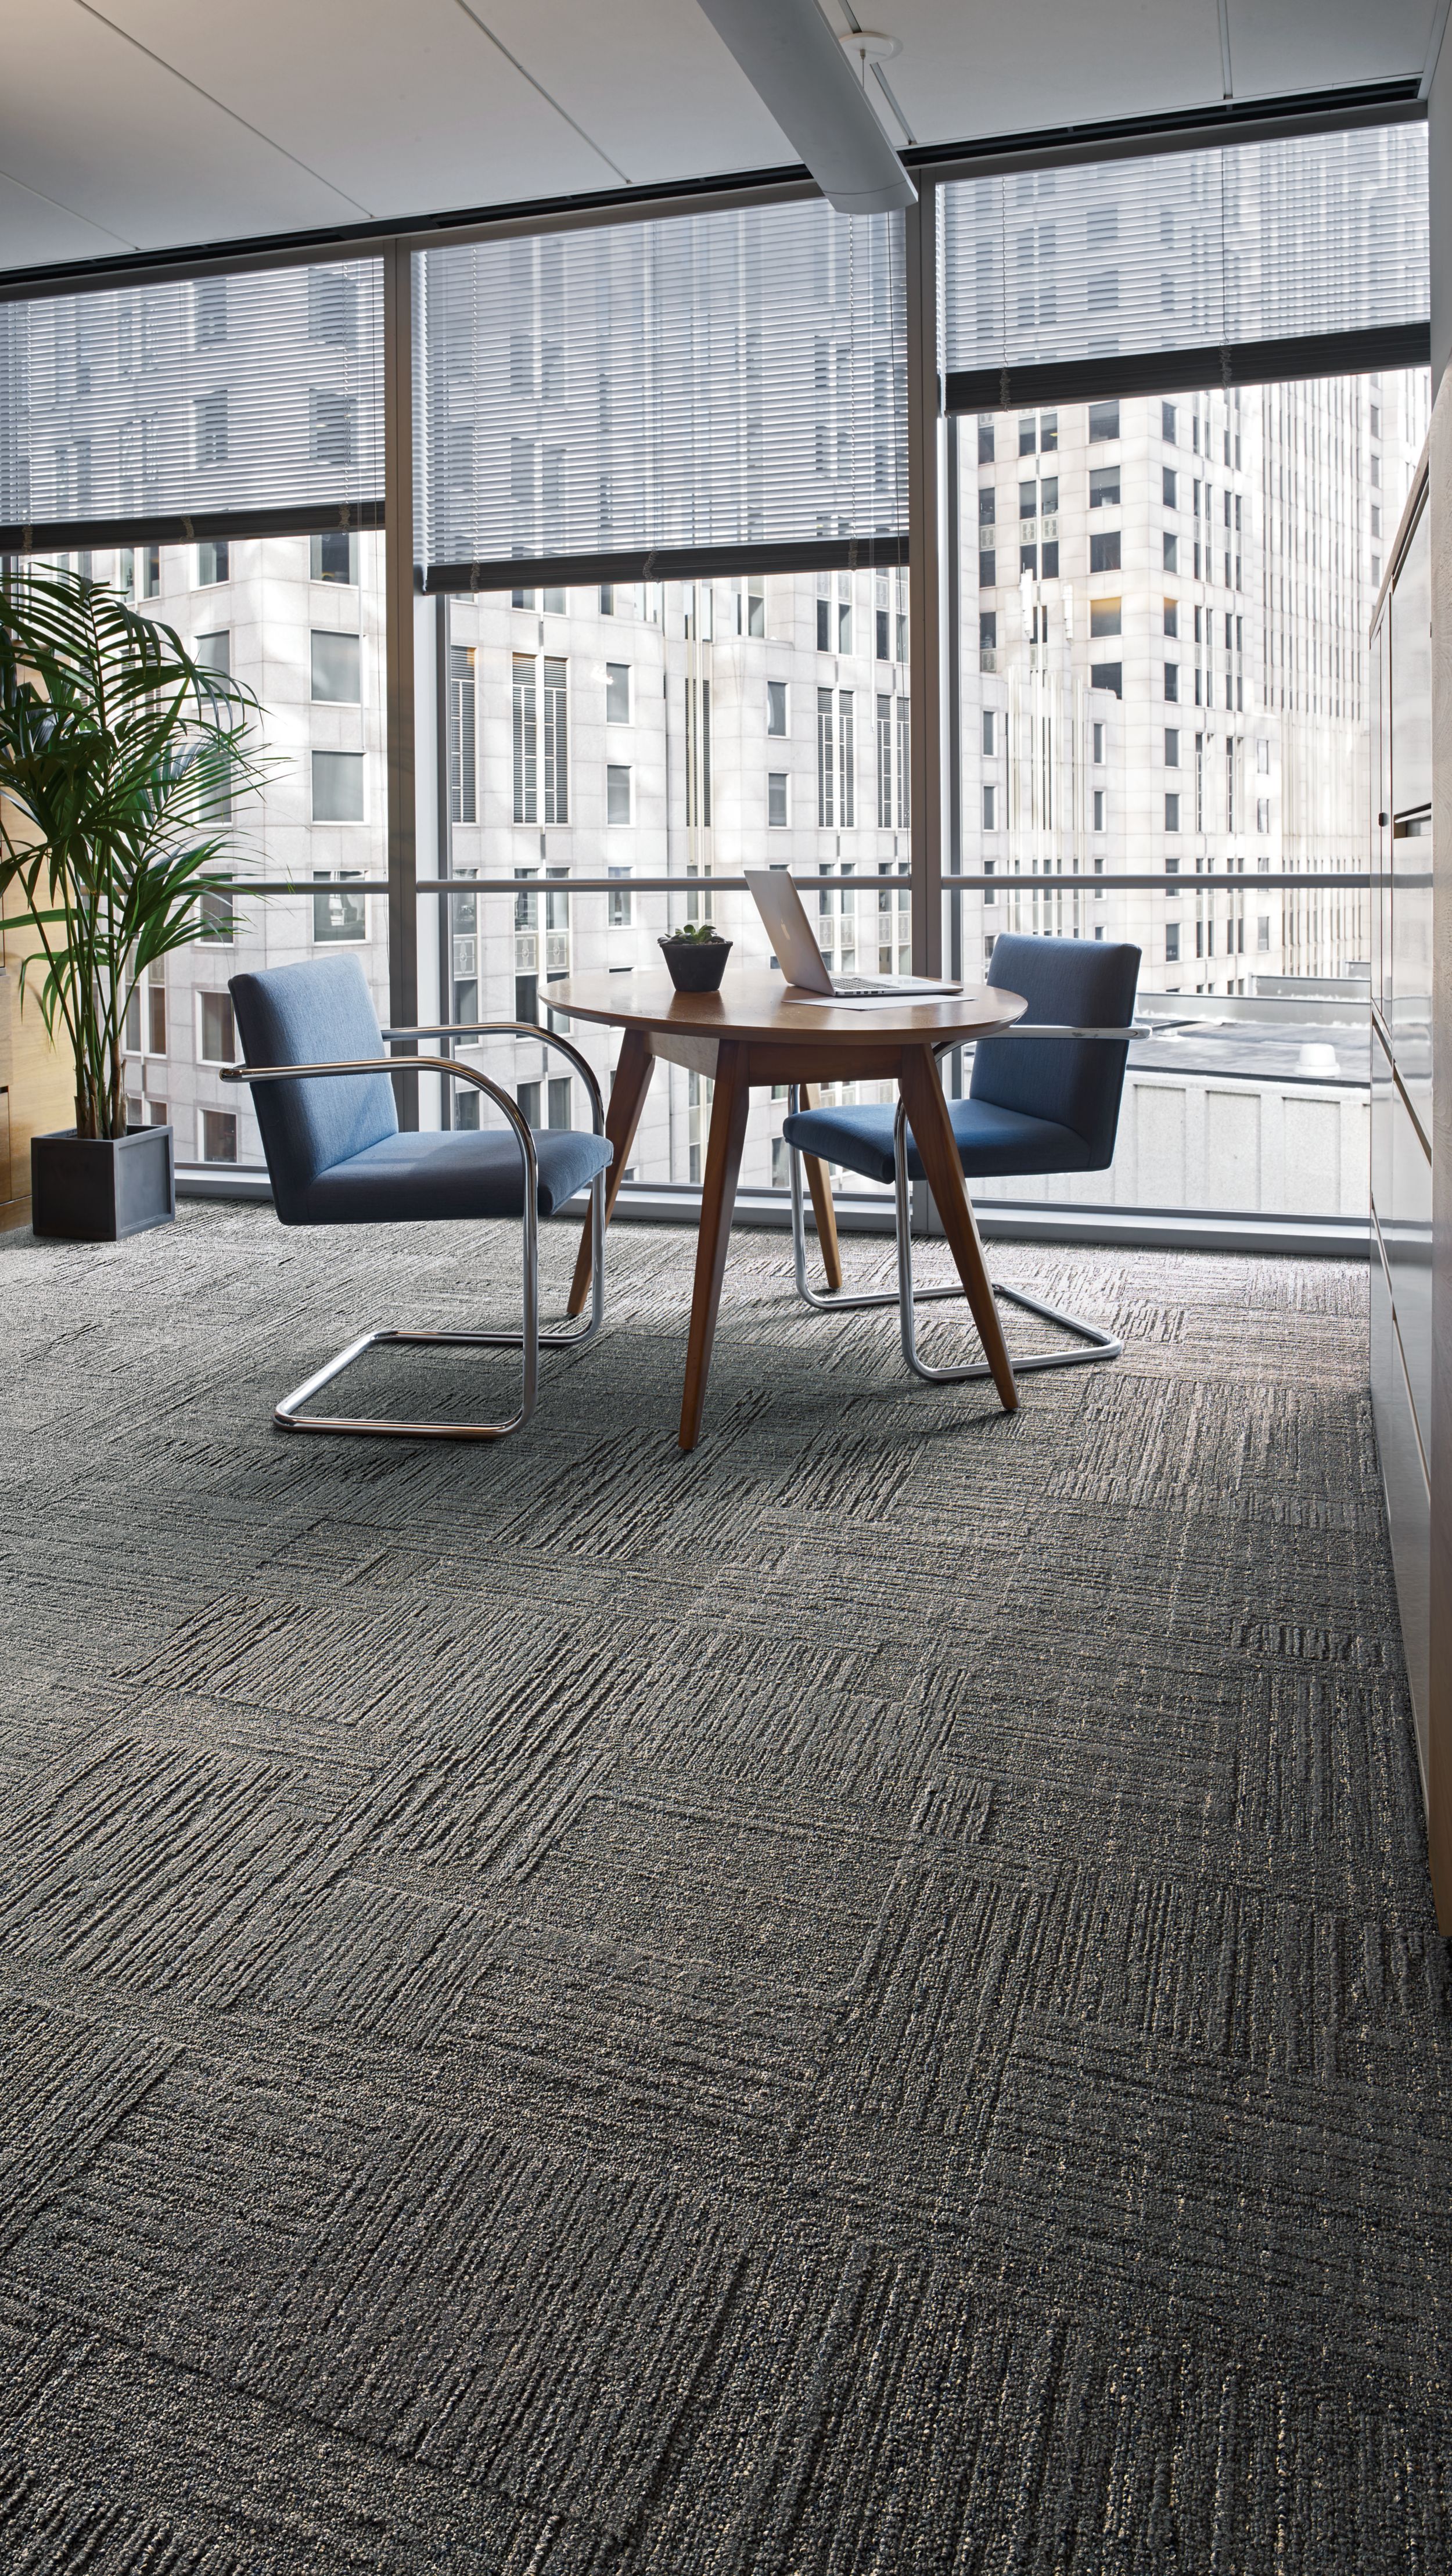 Interface Striation carpet tile in office with glass walls, large plant and small table with chairs numéro d’image 2